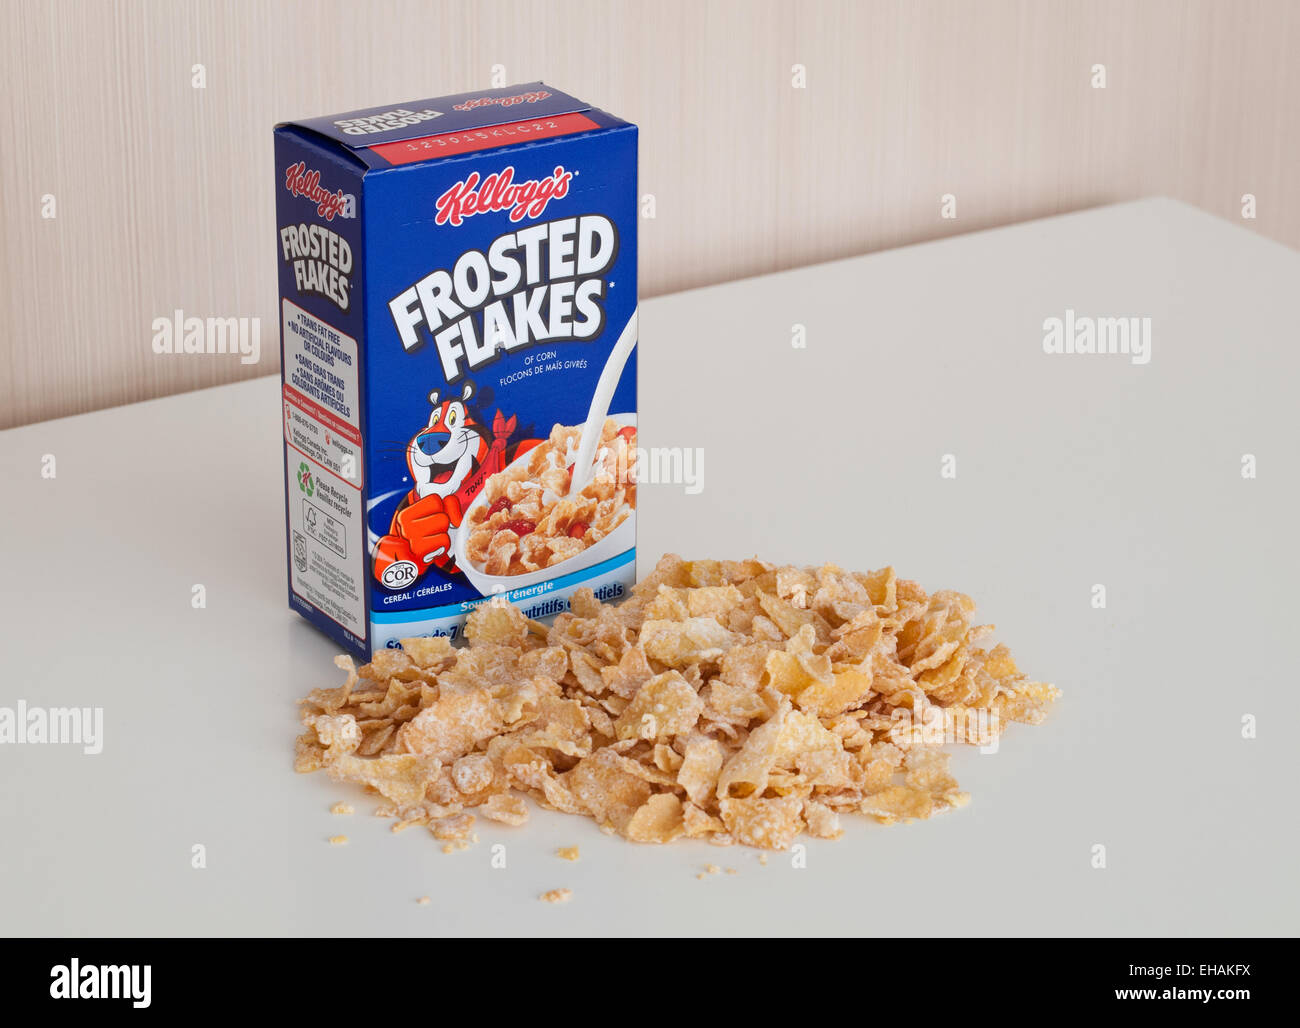 A fun-packed sized box of Kellogg's Frosted Flakes cereal. Canadian  packaging shown Stock Photo - Alamy